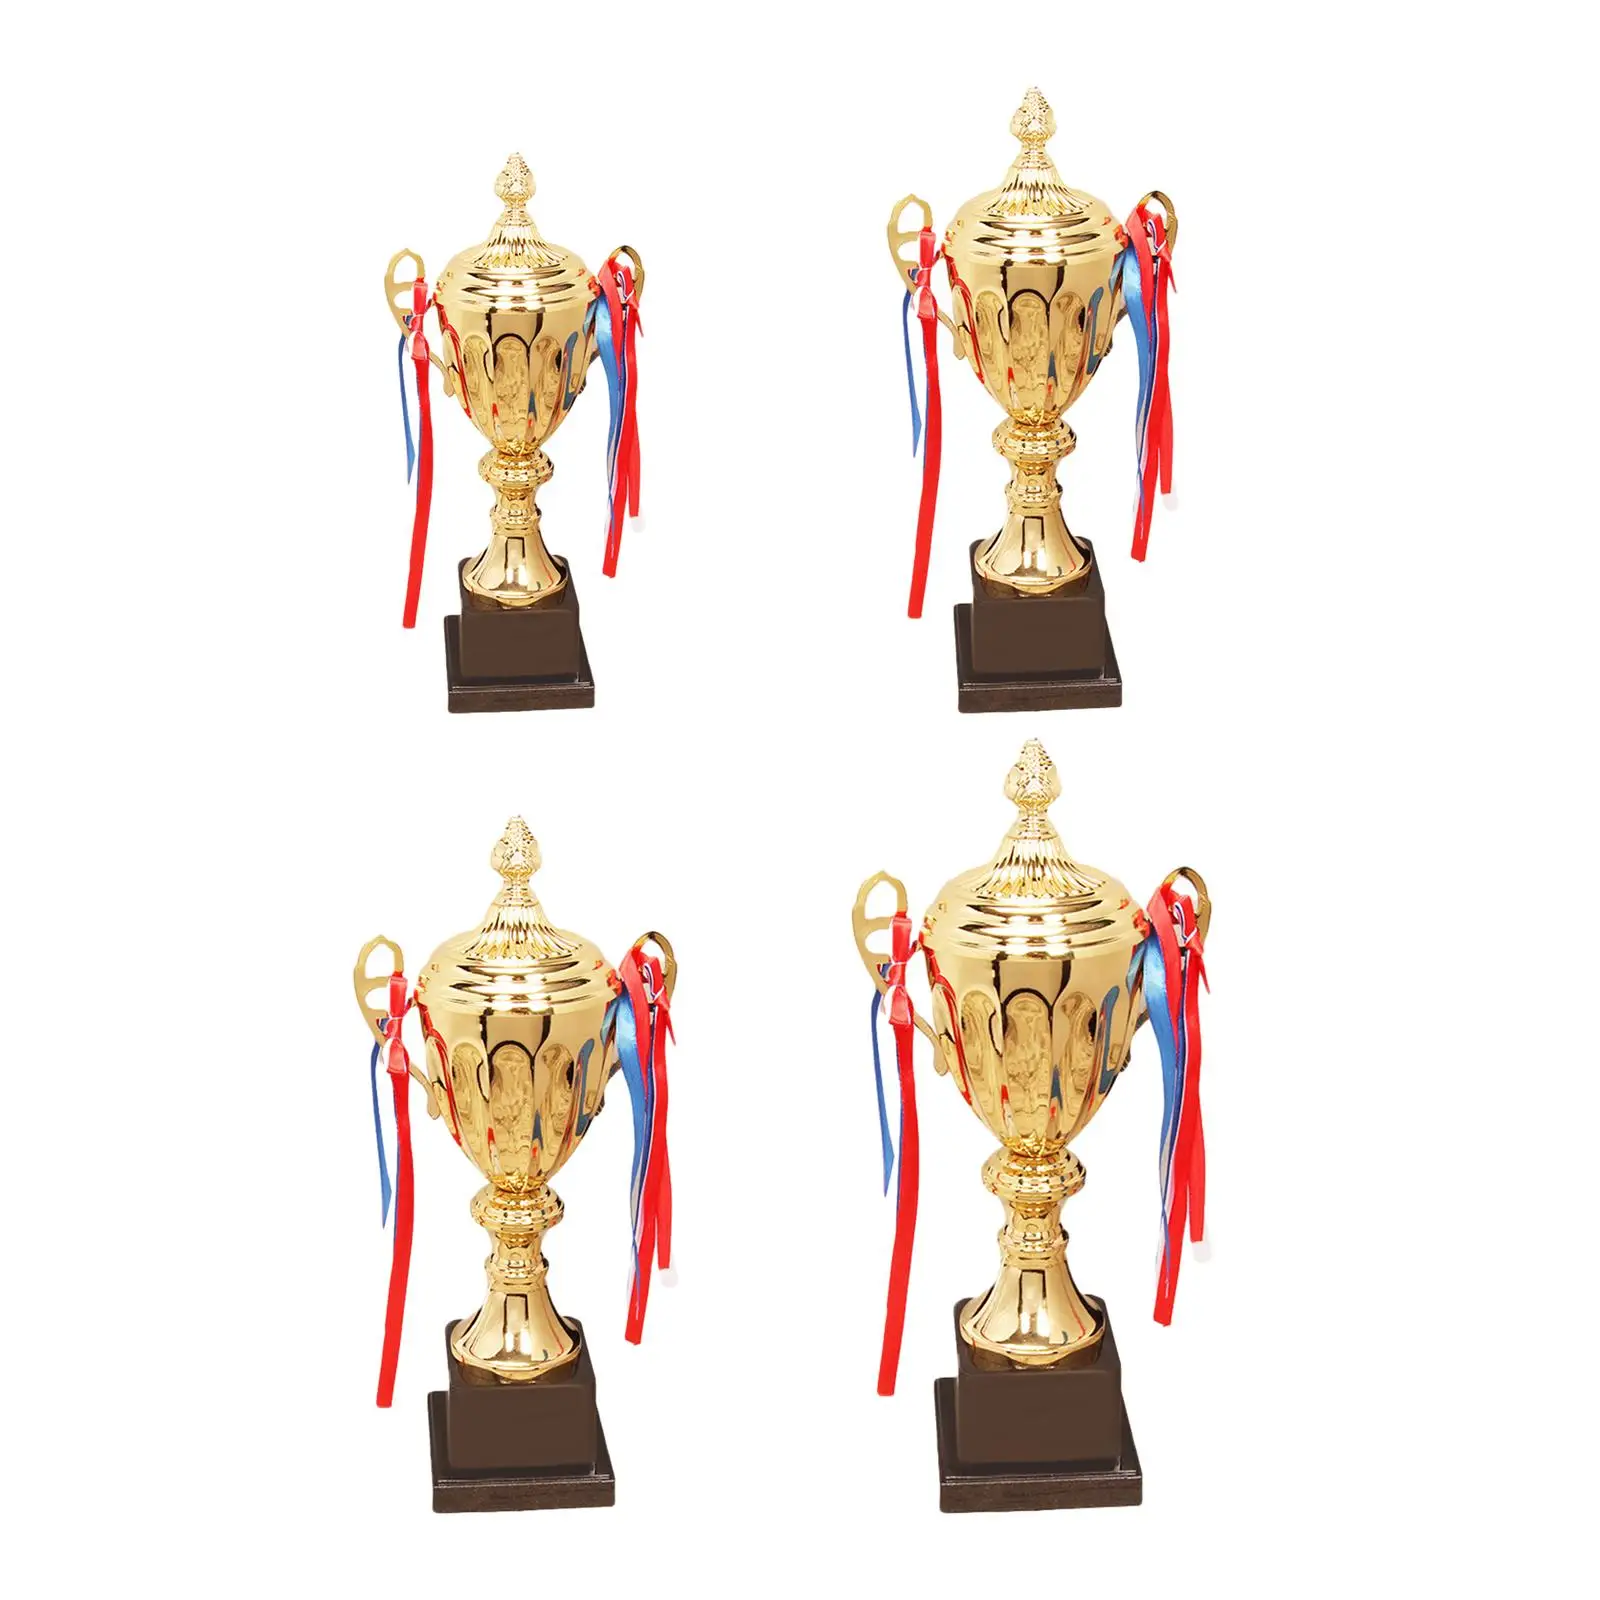 Large Award Trophies Games Prize Winning Trophy Trophy Cup Award for Competition Celebrations Championships Baseball Decorations